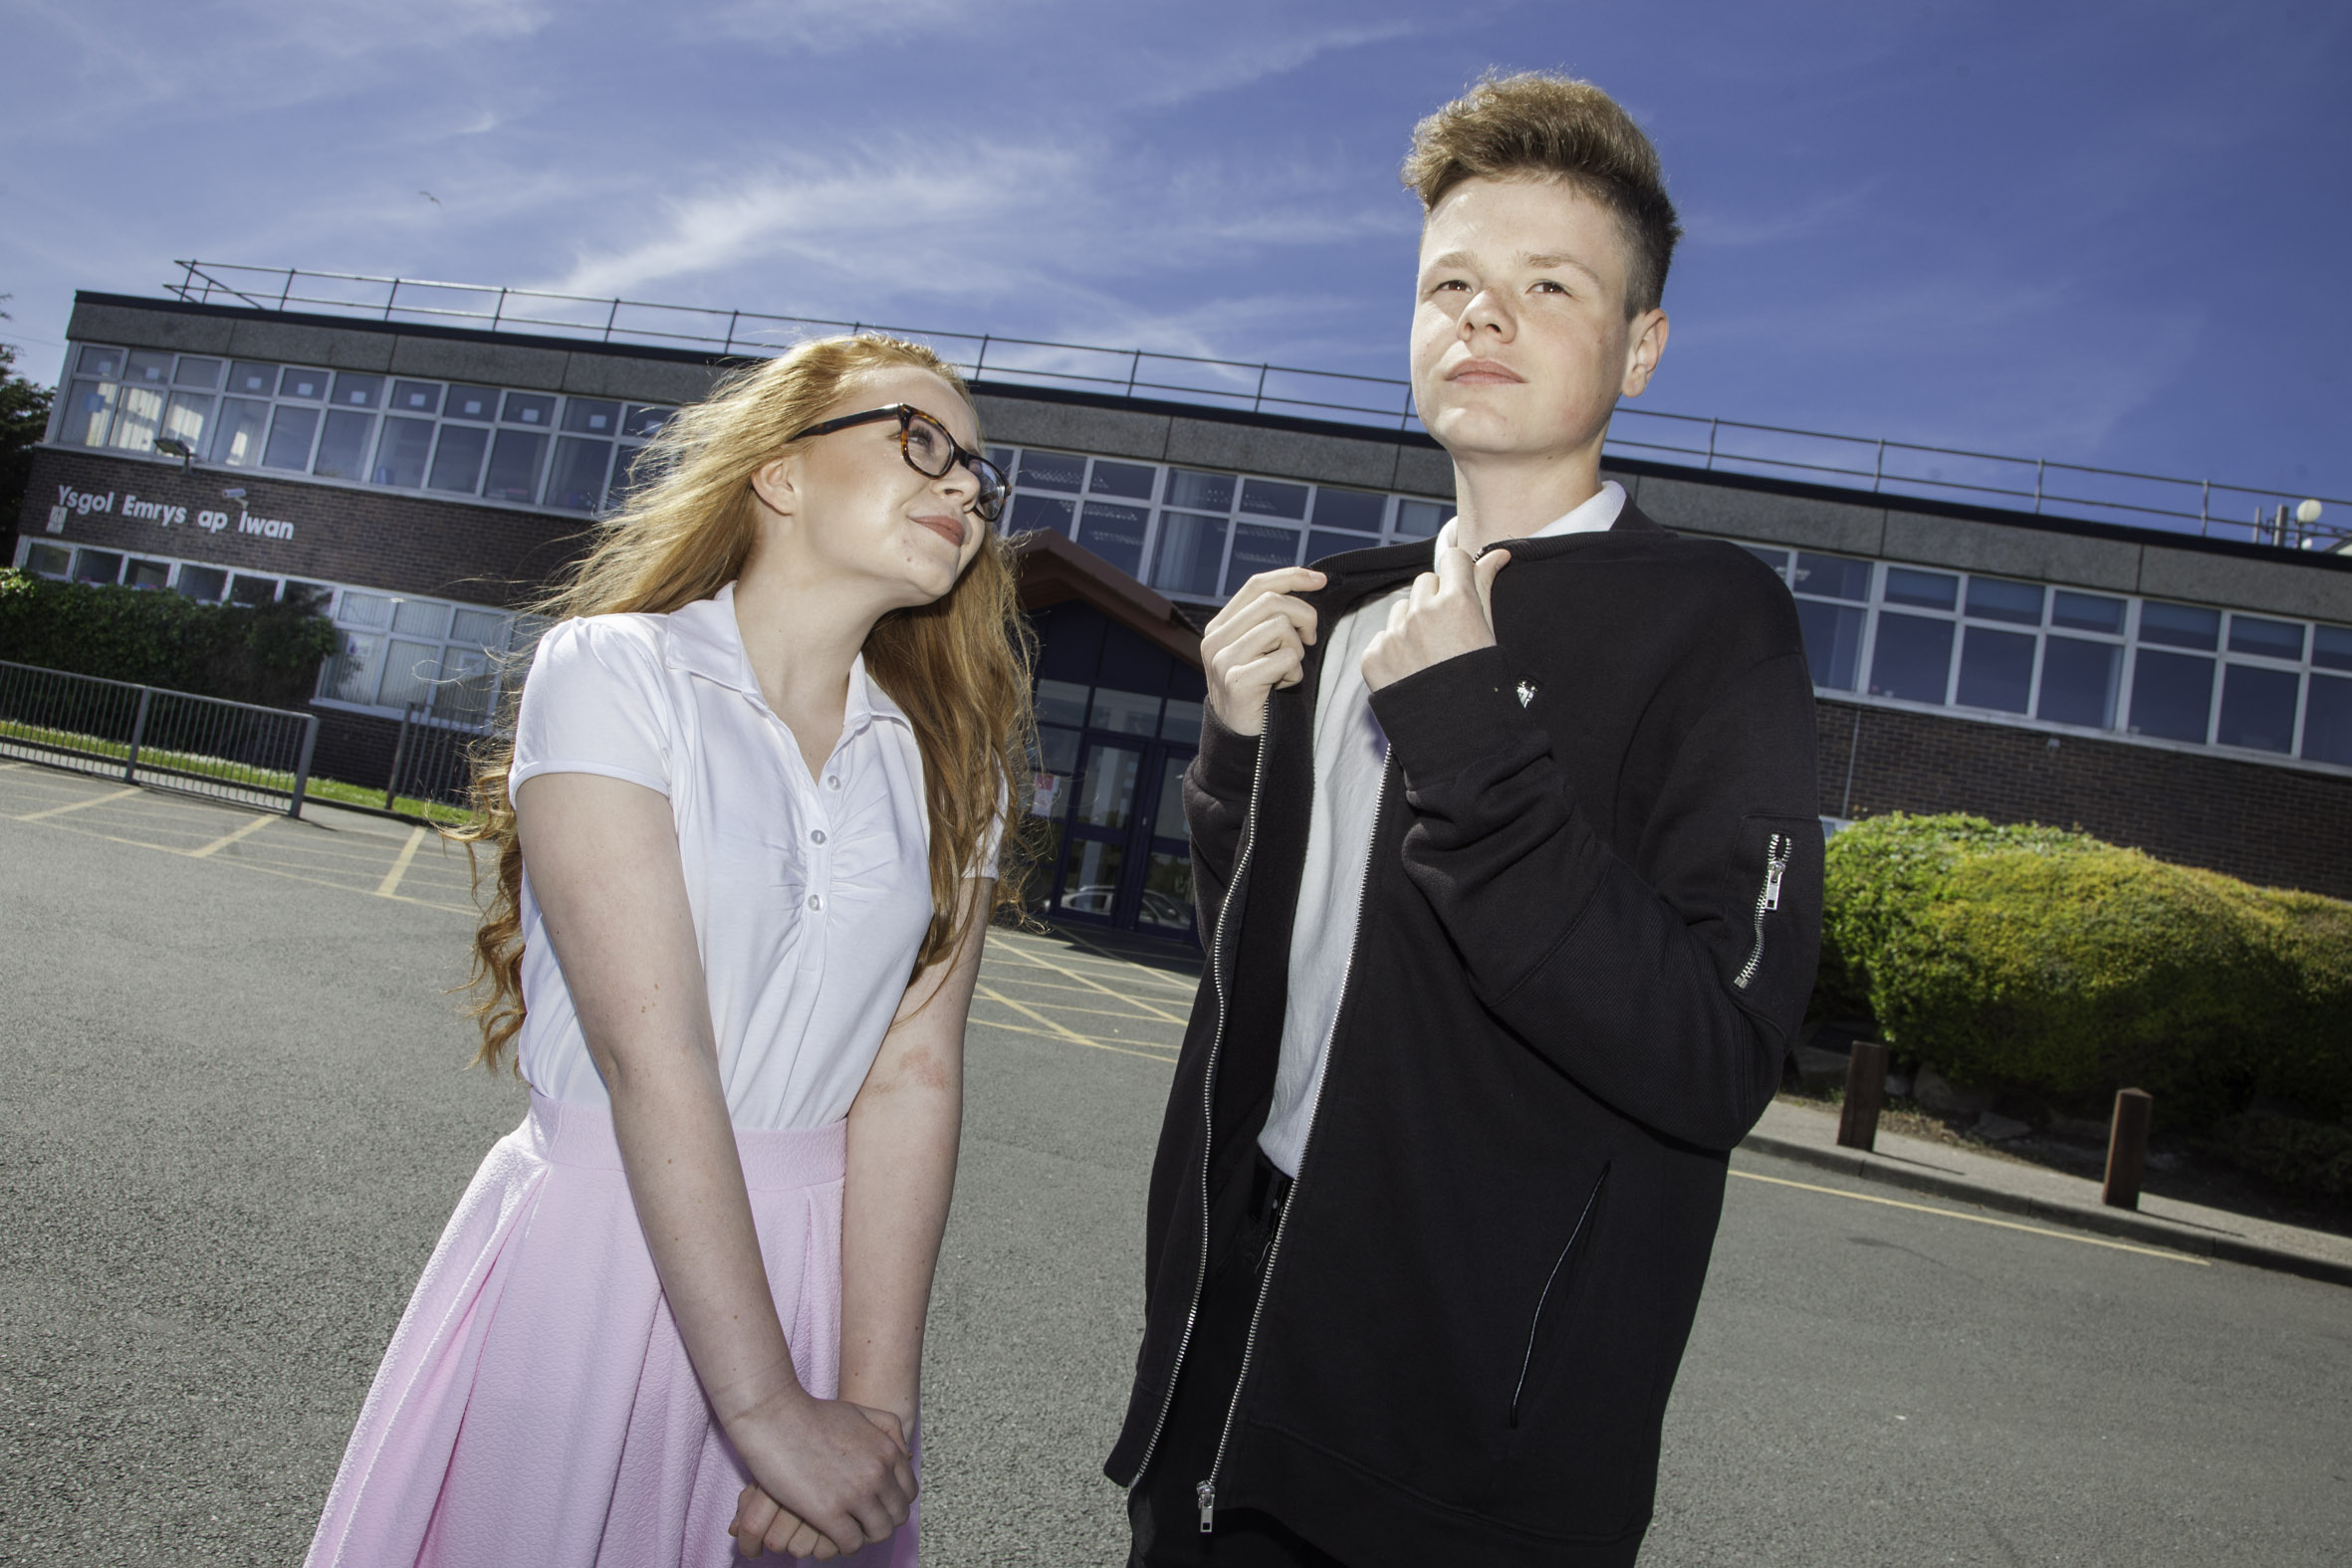 Ysgol Emrys ap Iwan, Abergele students who are in rehearsals for their production of Grease. Pictured are Sadie Wagstaff and Leon Best as Sandy and Danny.